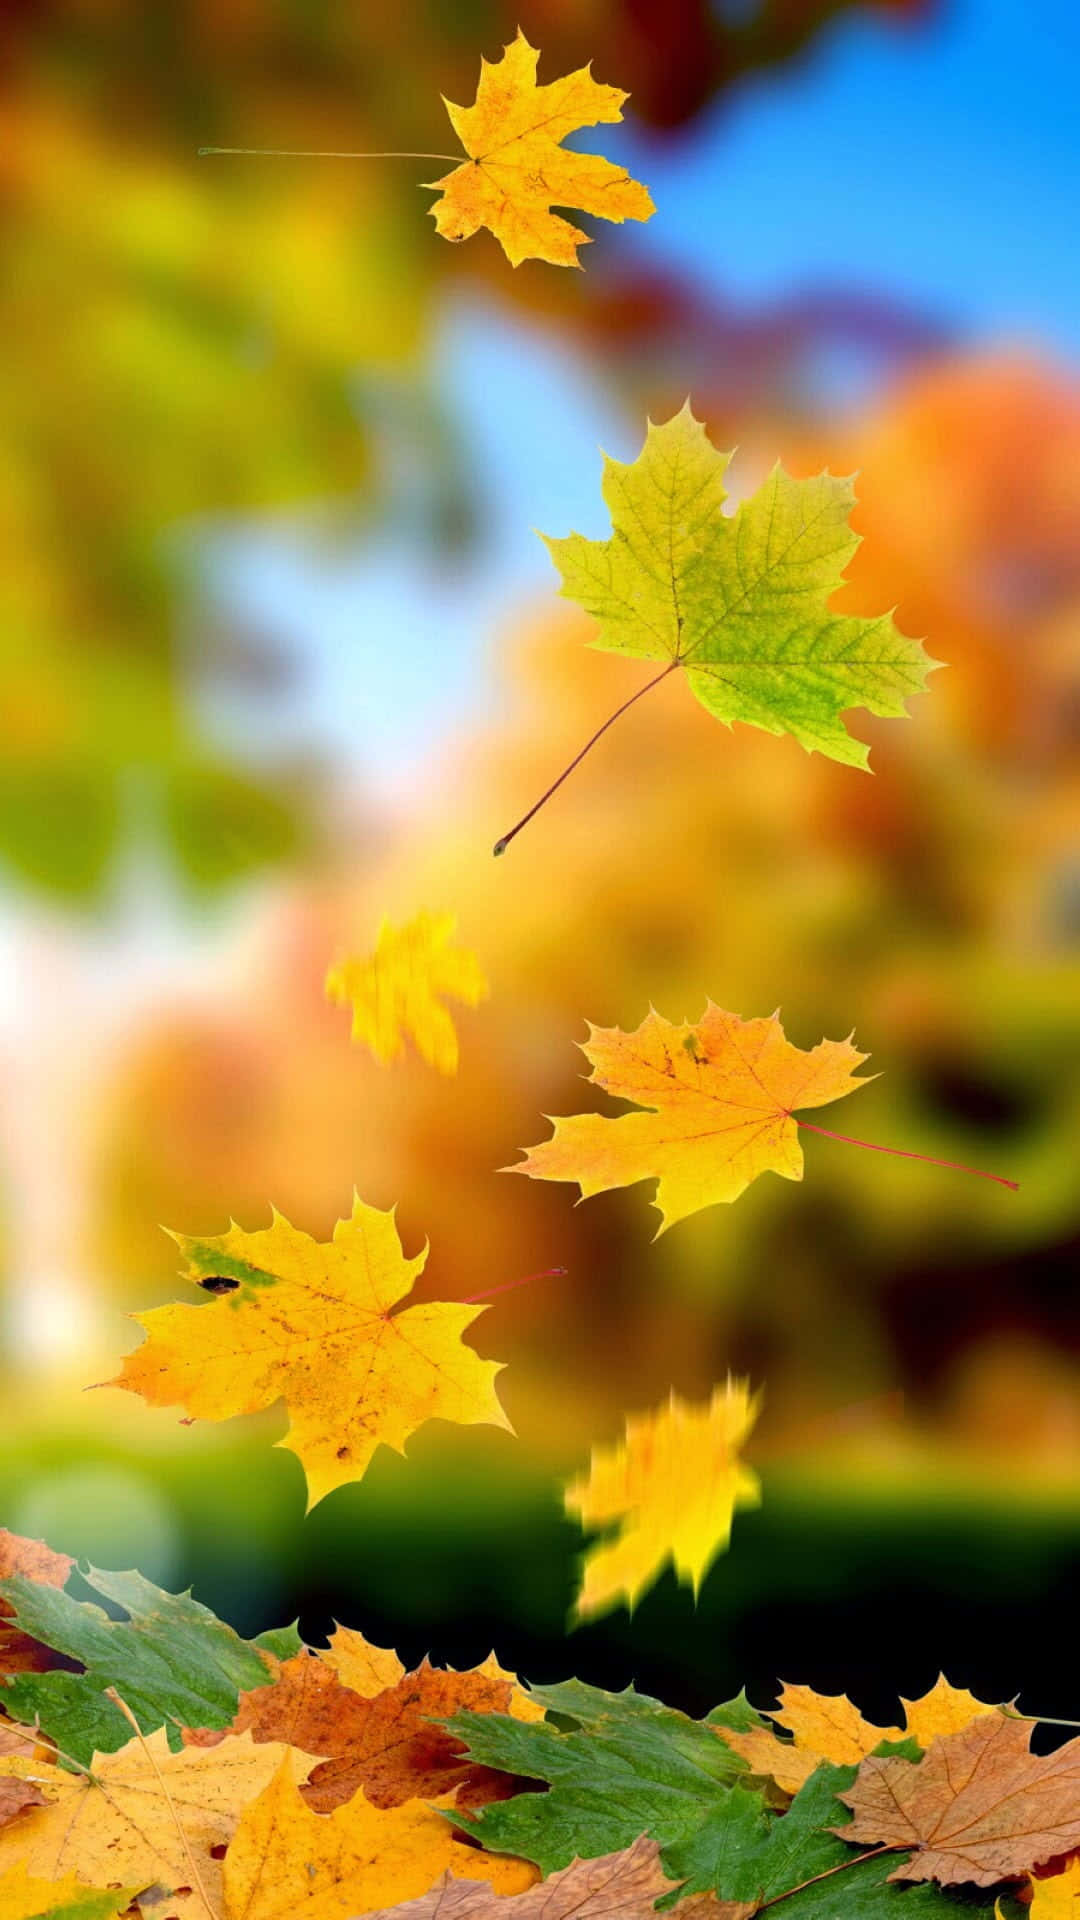 Enjoying a simple fall day in nature Wallpaper